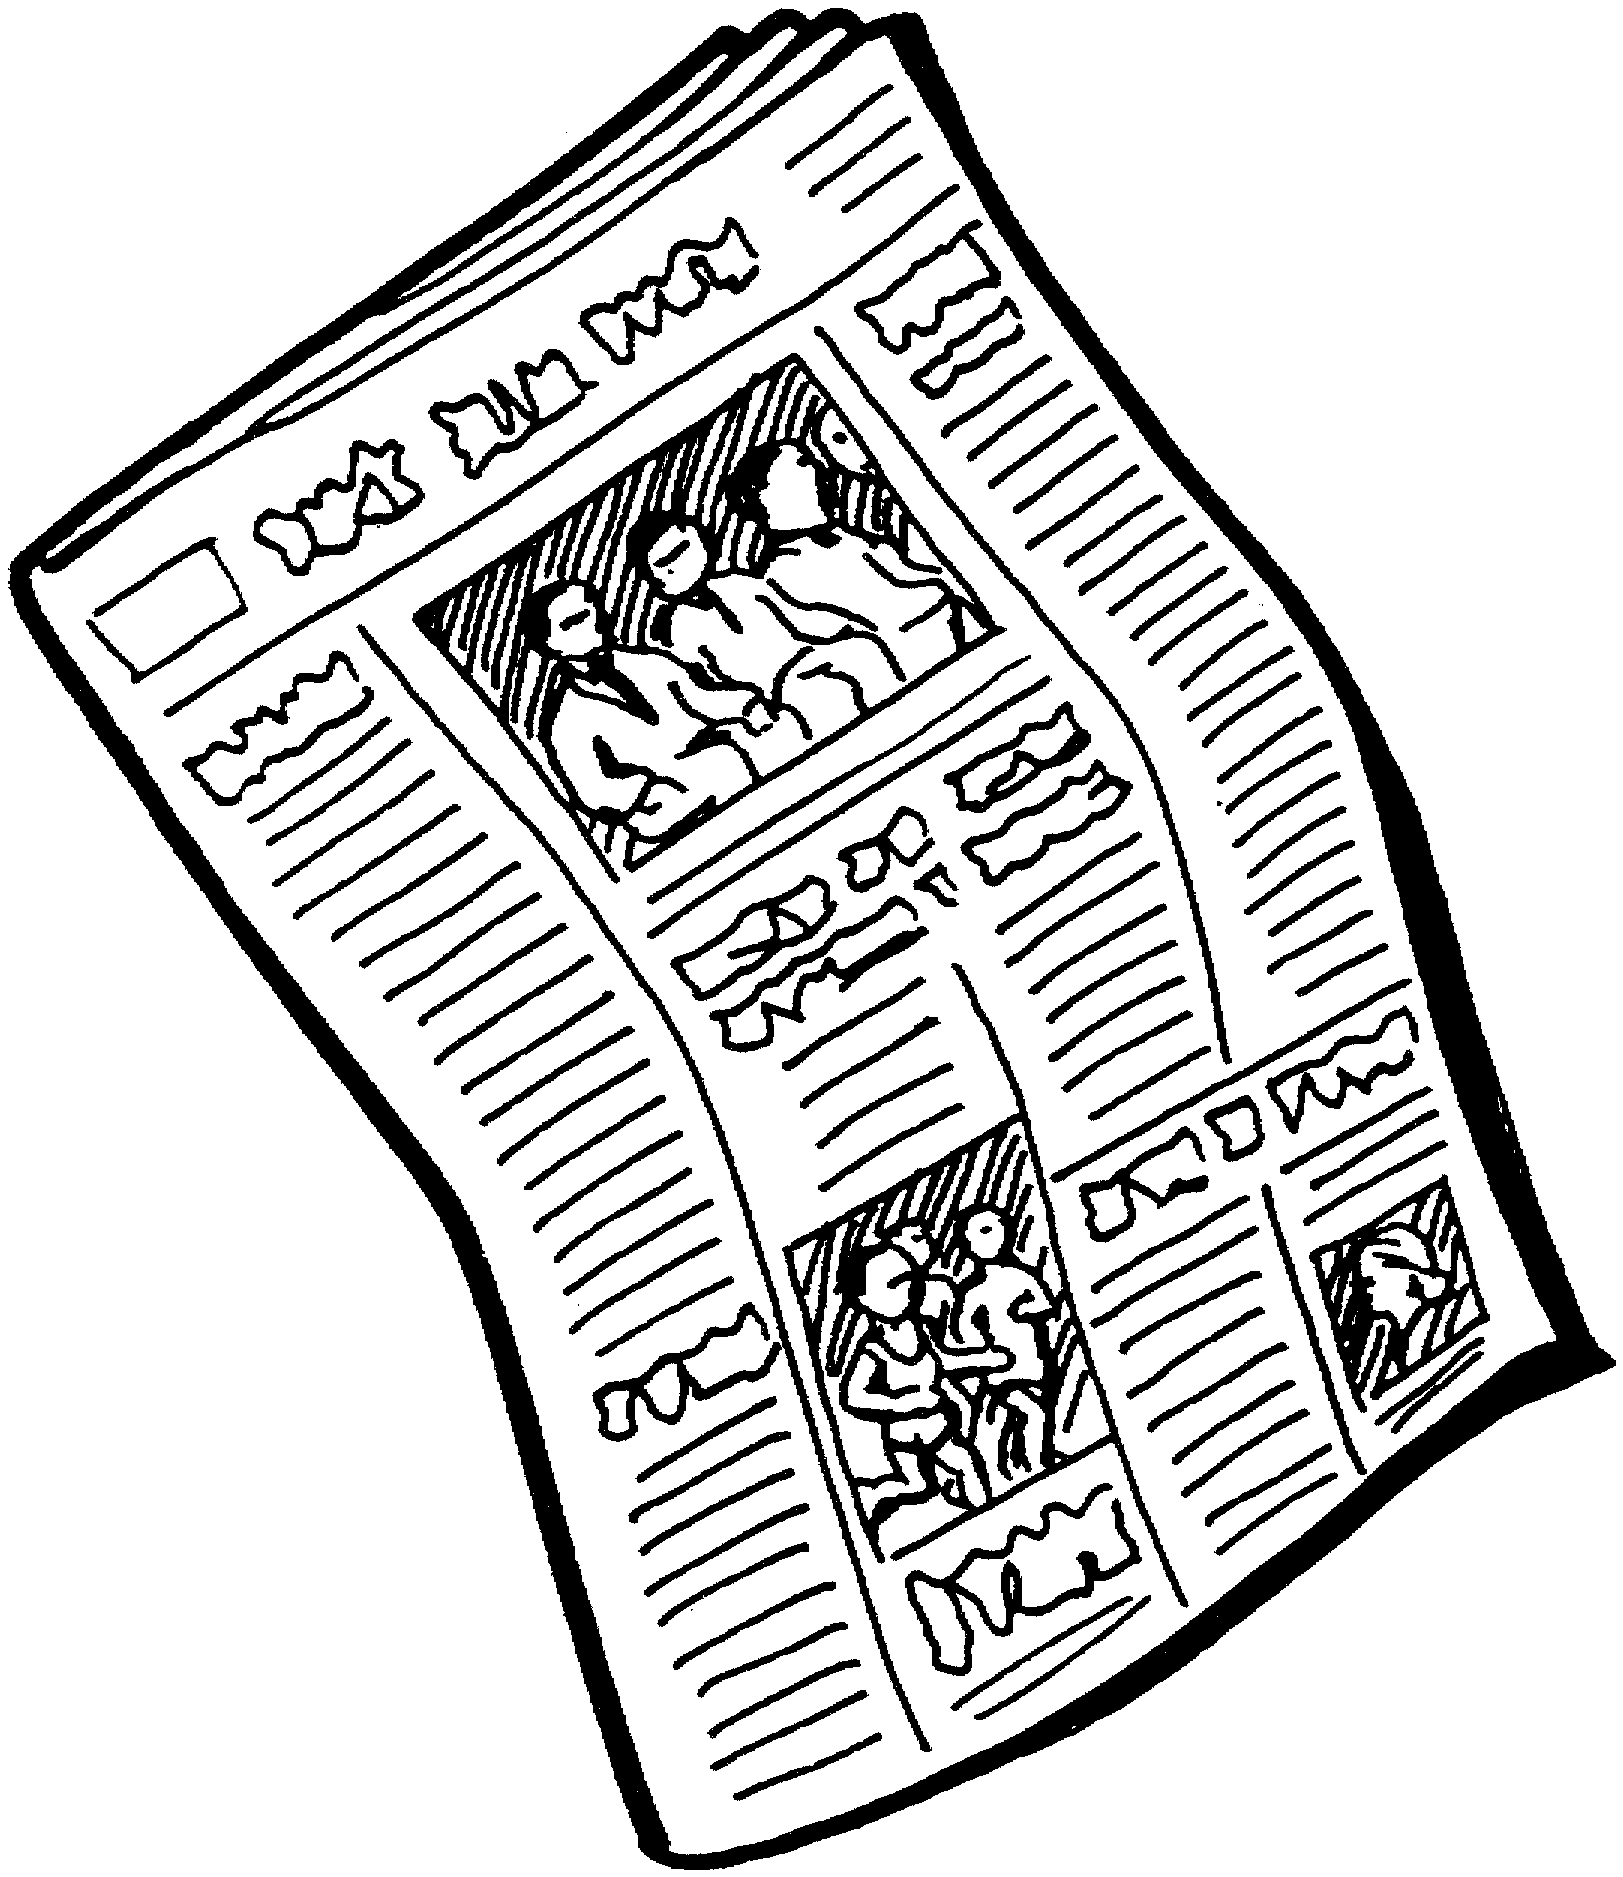 Reading newspaper clipart image 